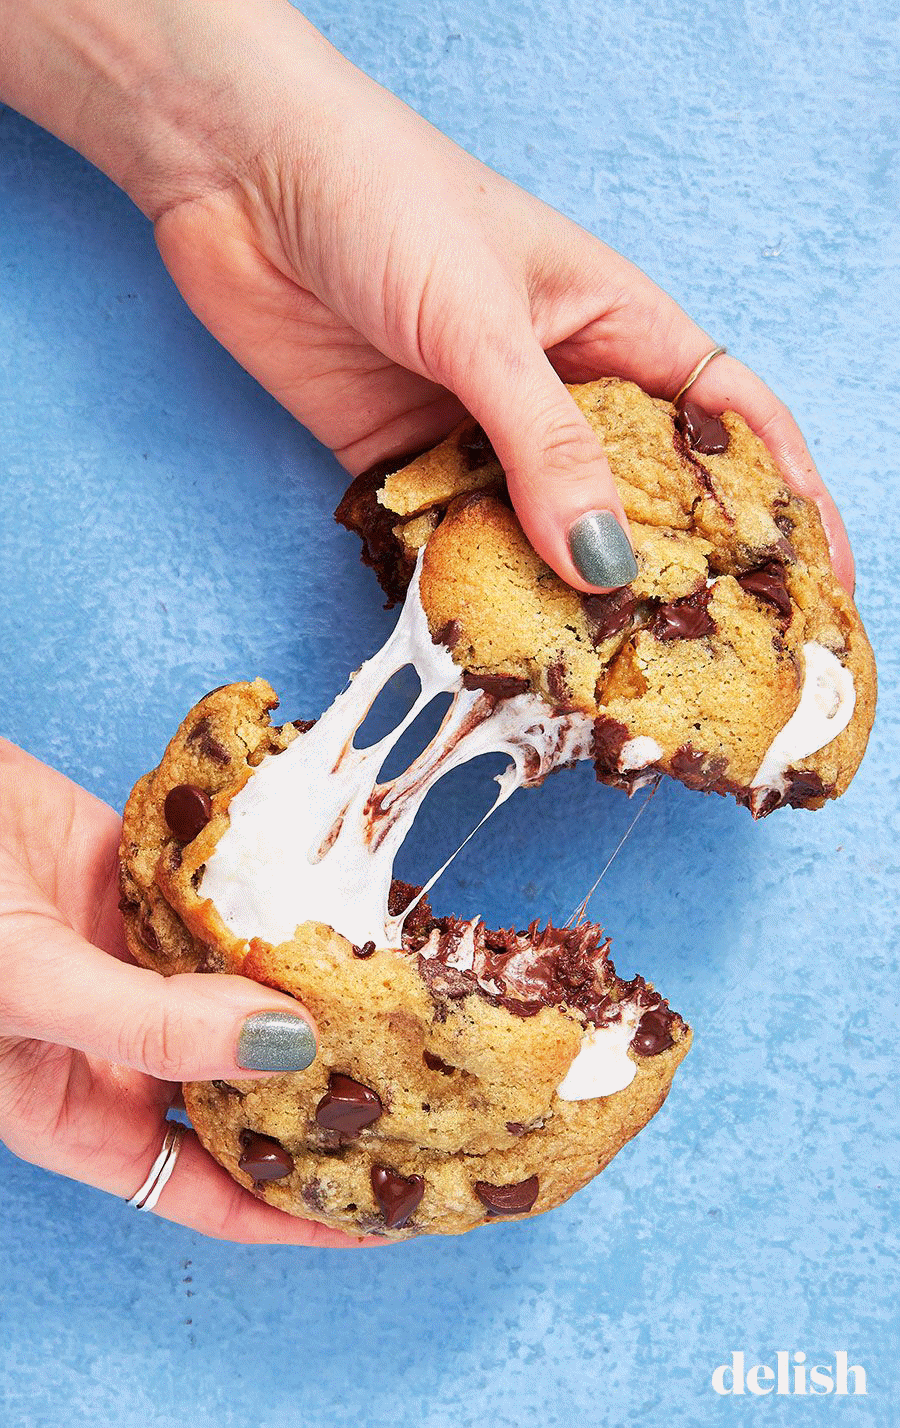 no joke these cookies are stuffed with marshmallow and gif small